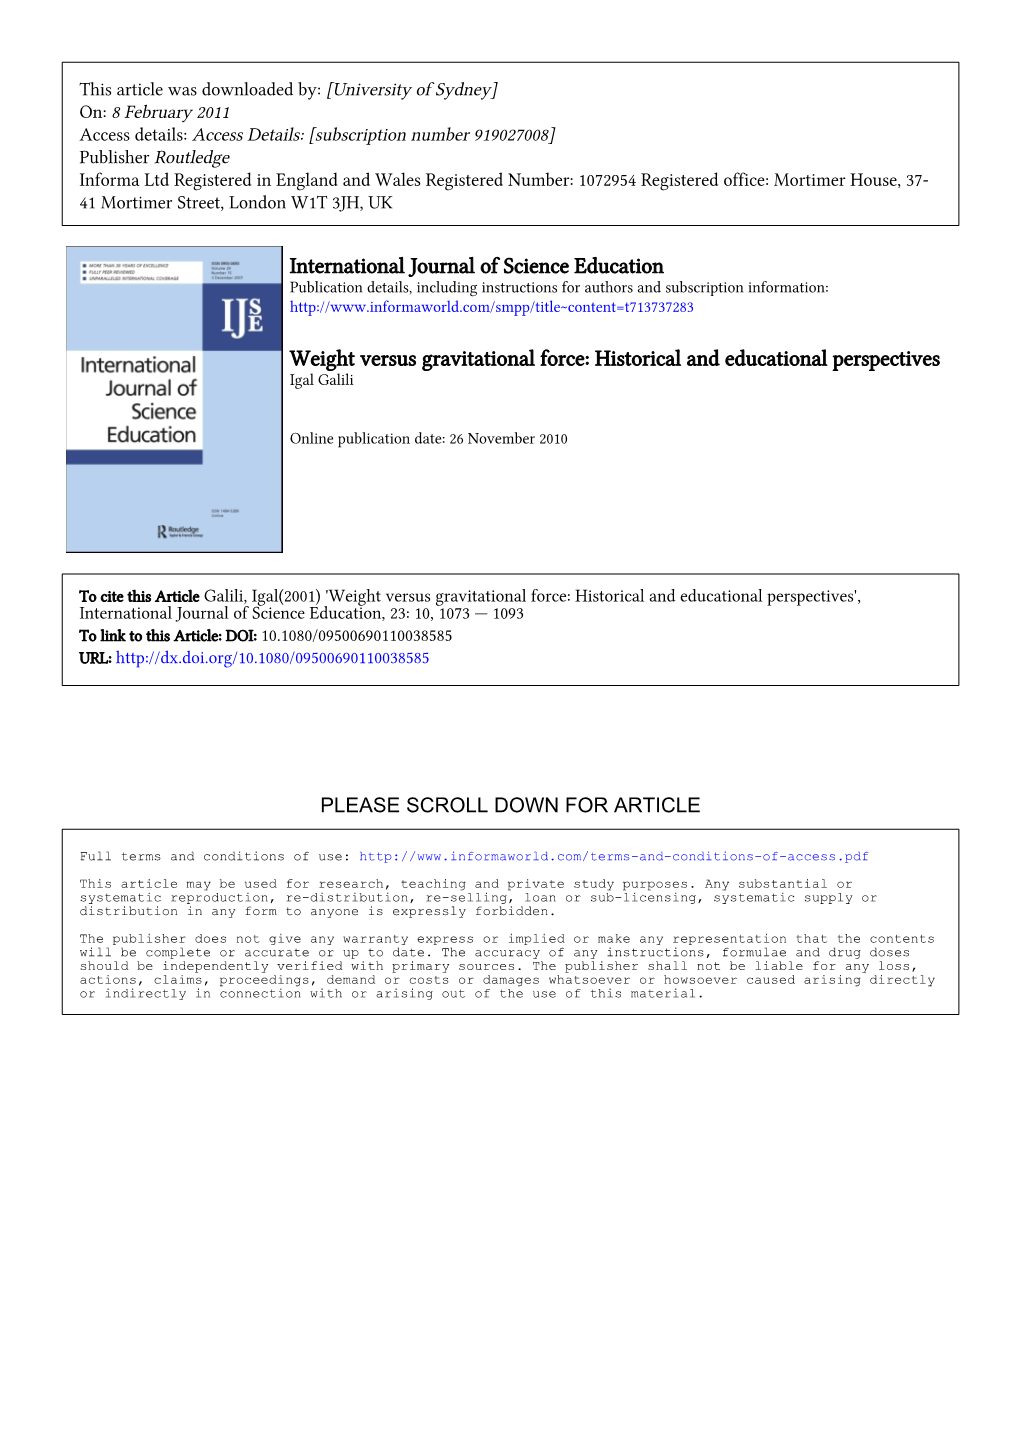 International Journal of Science Education Weight Versus Gravitational Force: Historical and Educational Perspectives